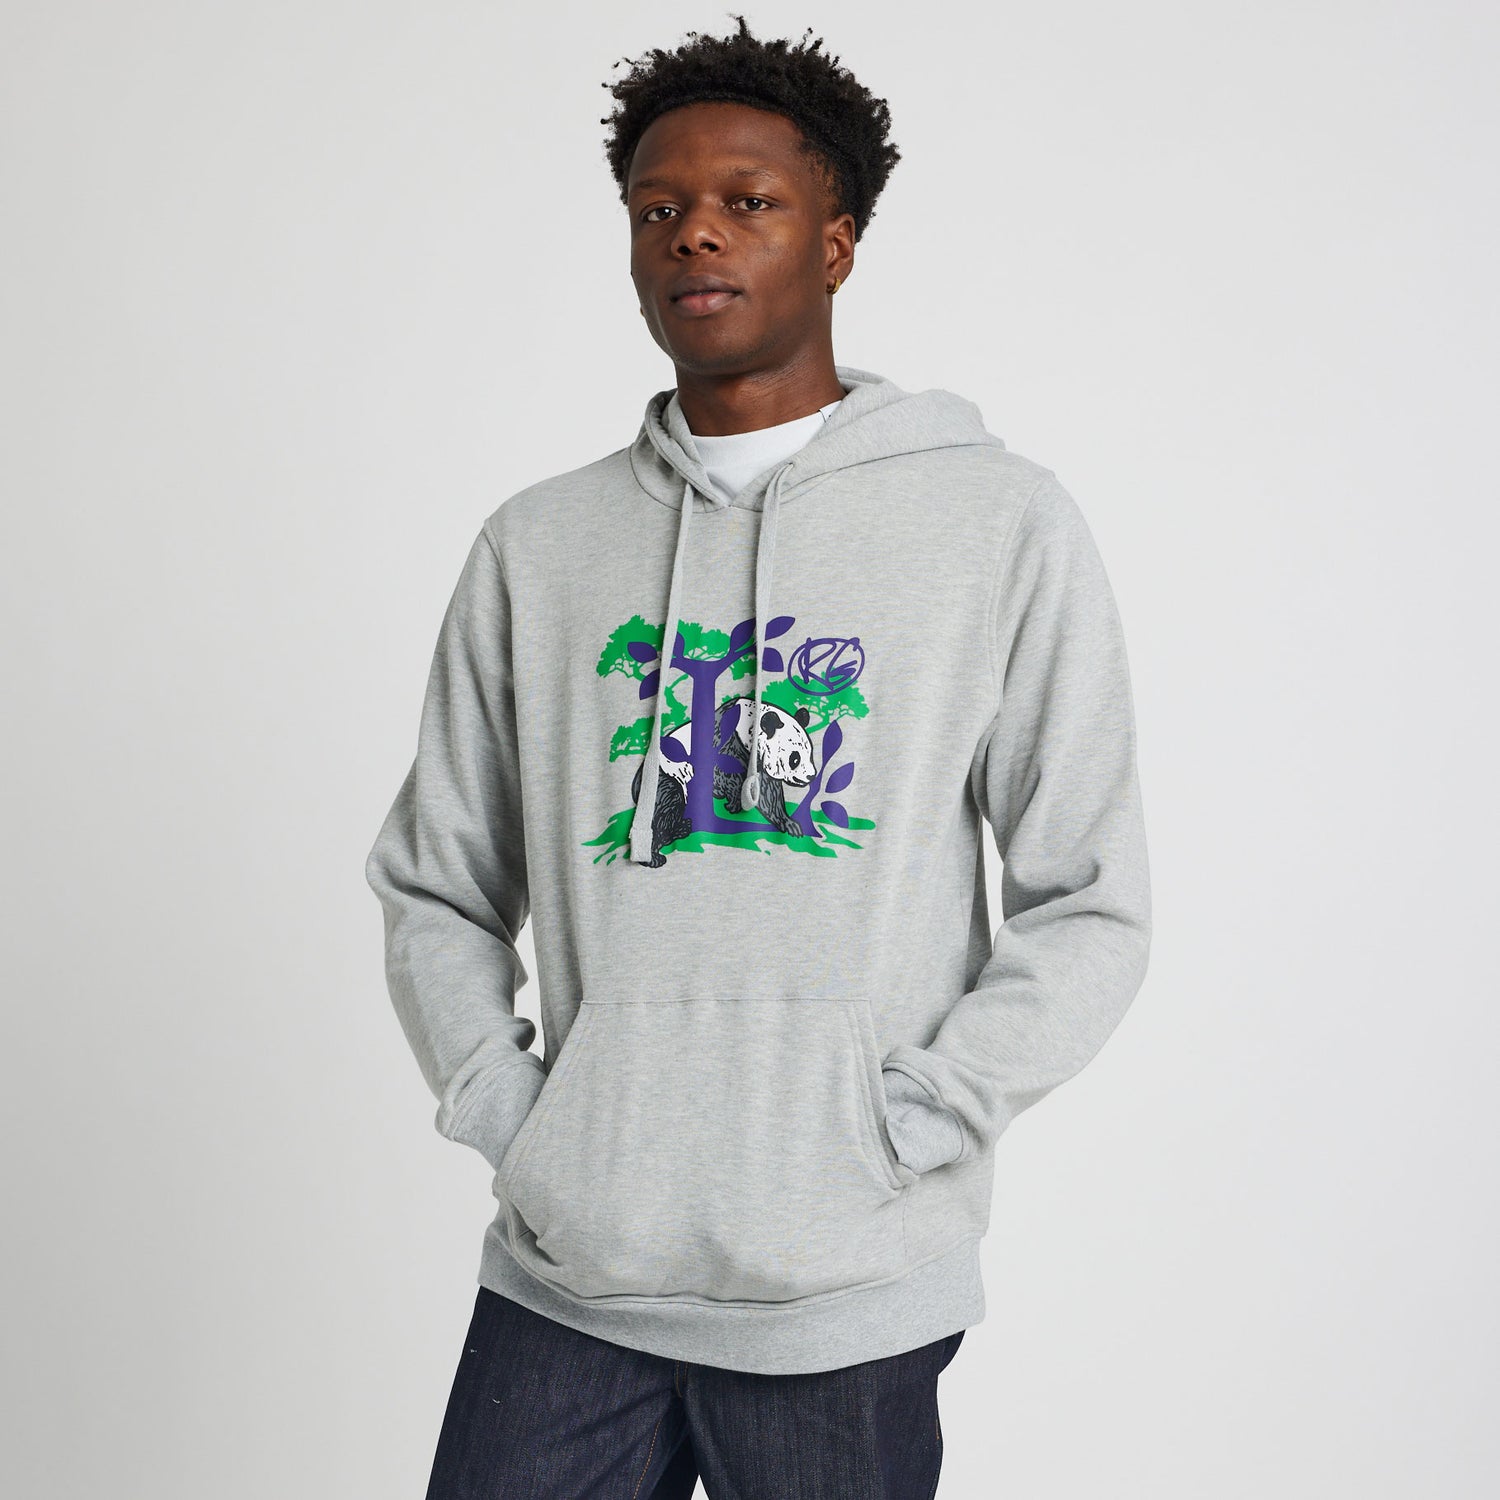 PANDA SCOUT L PULLOVER HOODIE - GREY HEATHER